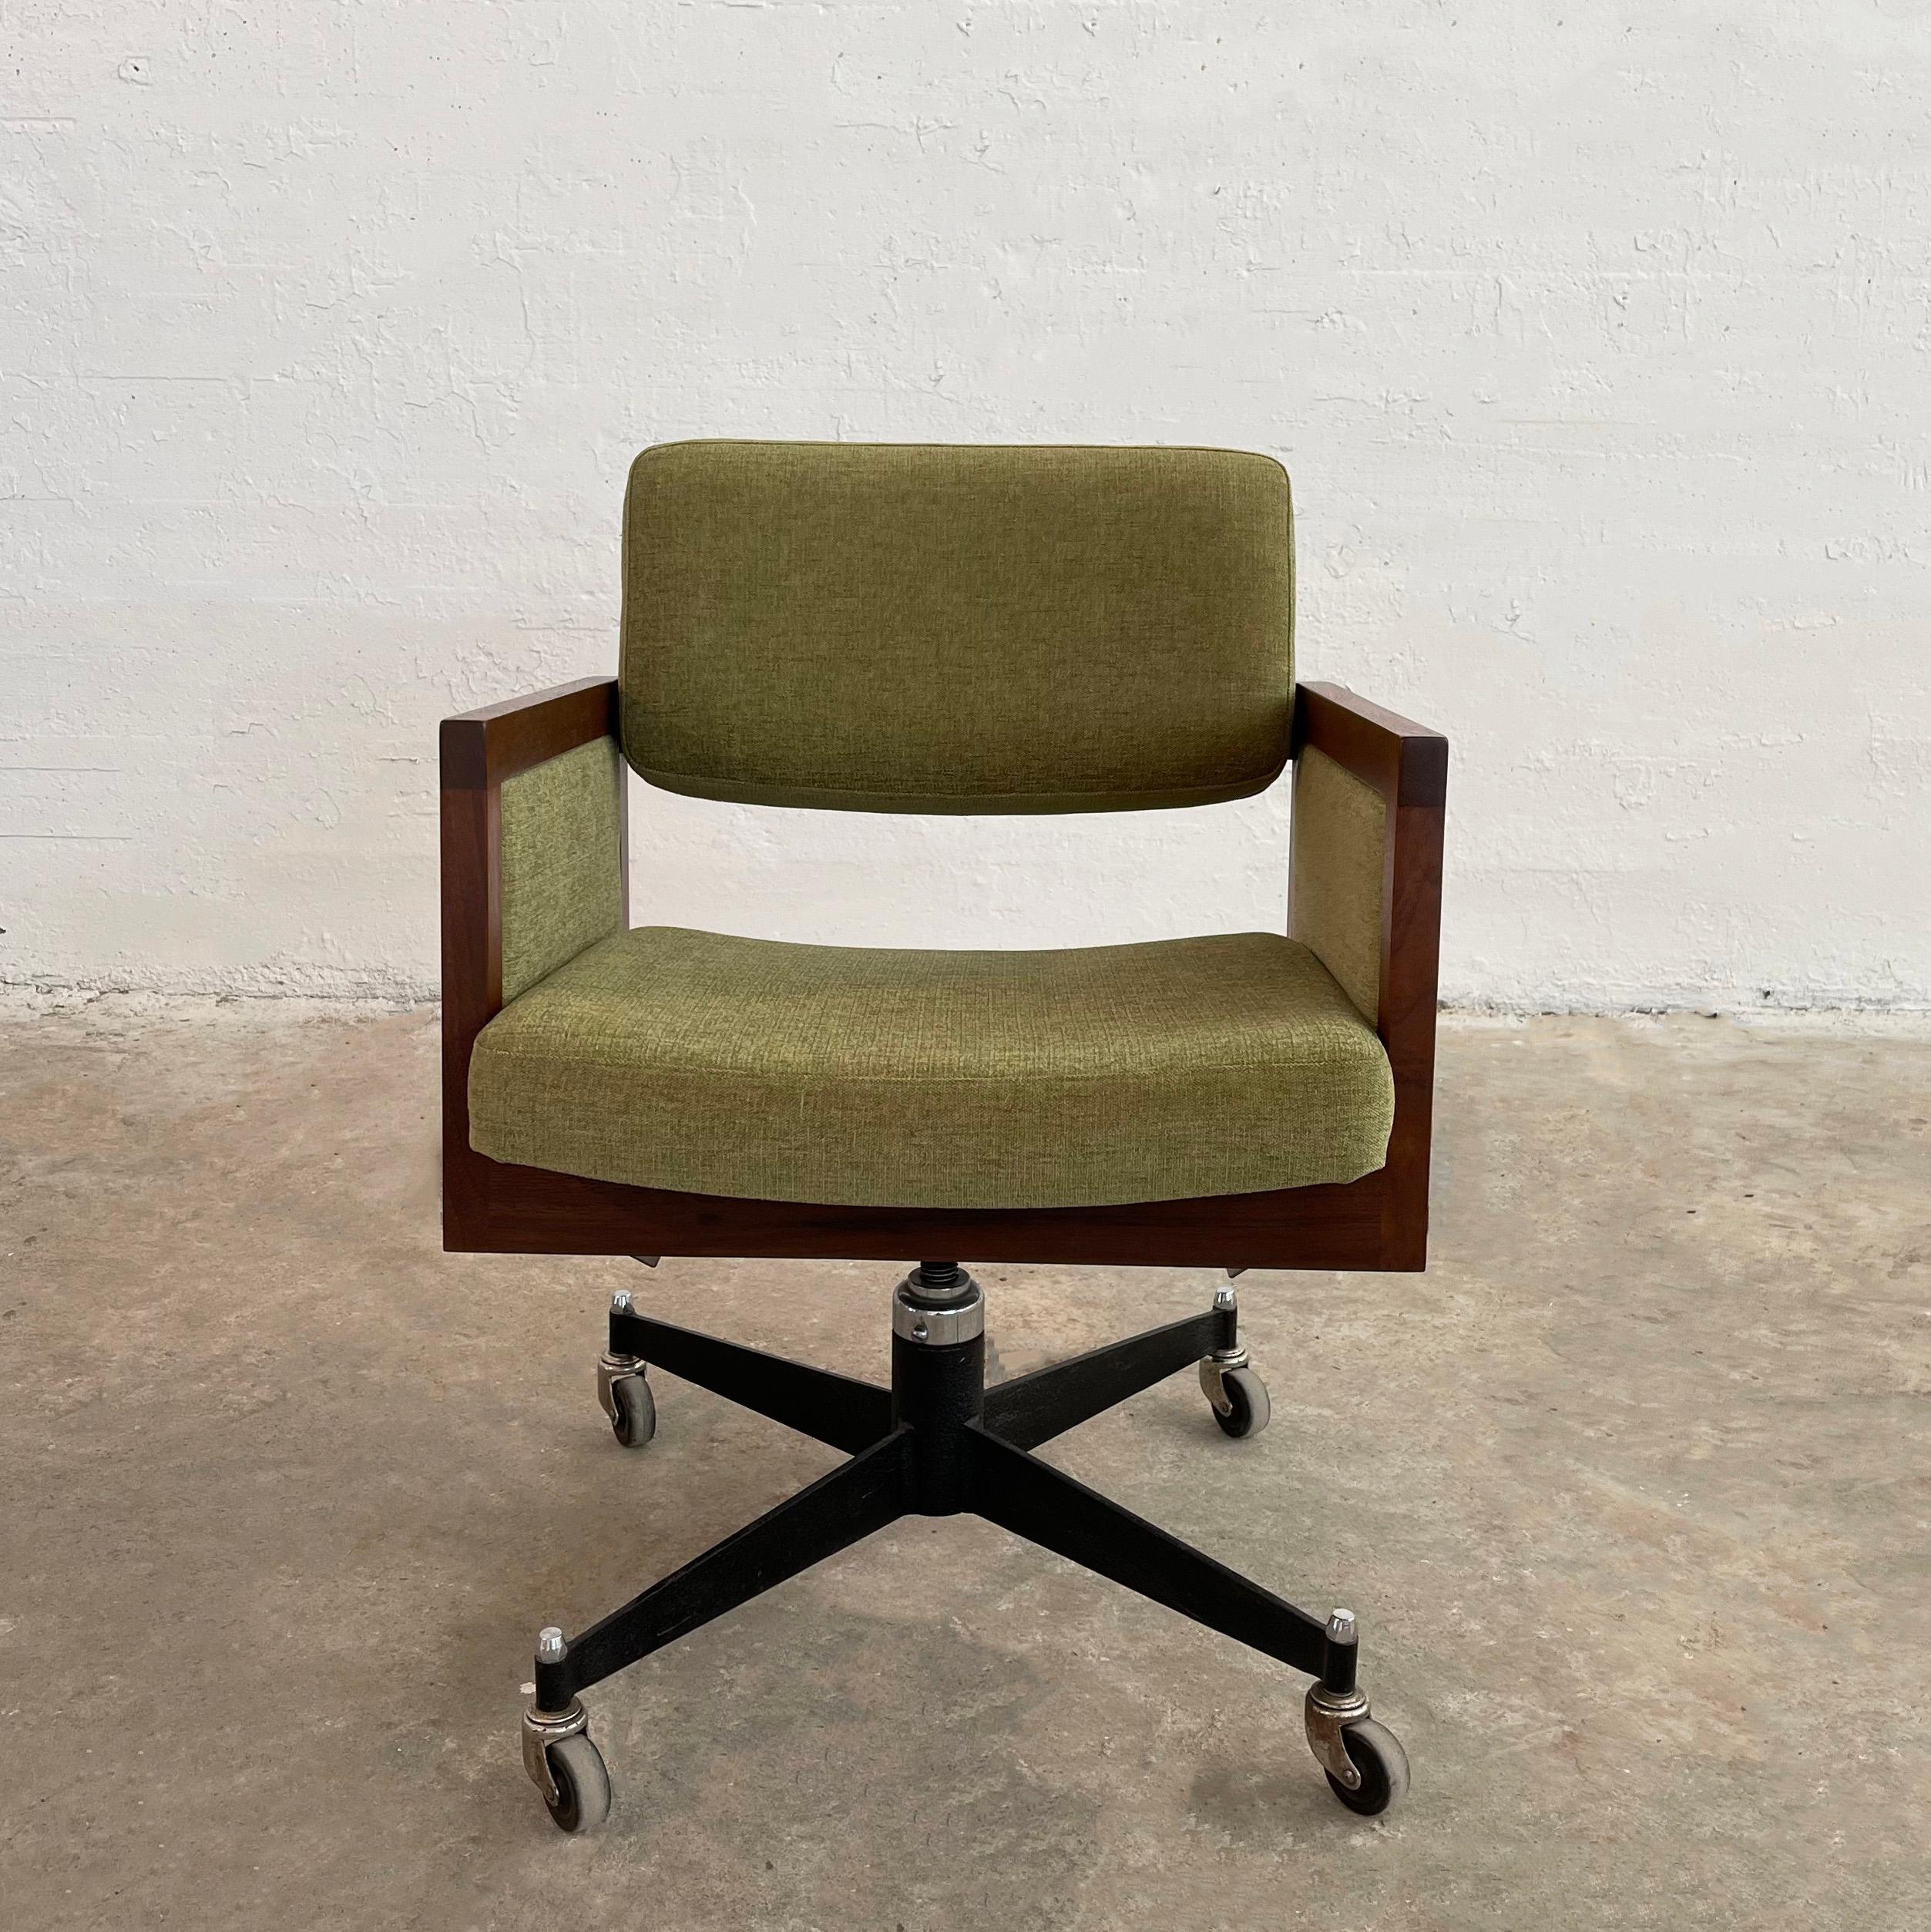 Mid-century modern, rolling, executive office armchair by Robert John is newly upholstered in olive green chenille trimmed in a walnut frame on a metal base.  The arm height measures 24.5 inches and footprint of base is 27 inches wide.